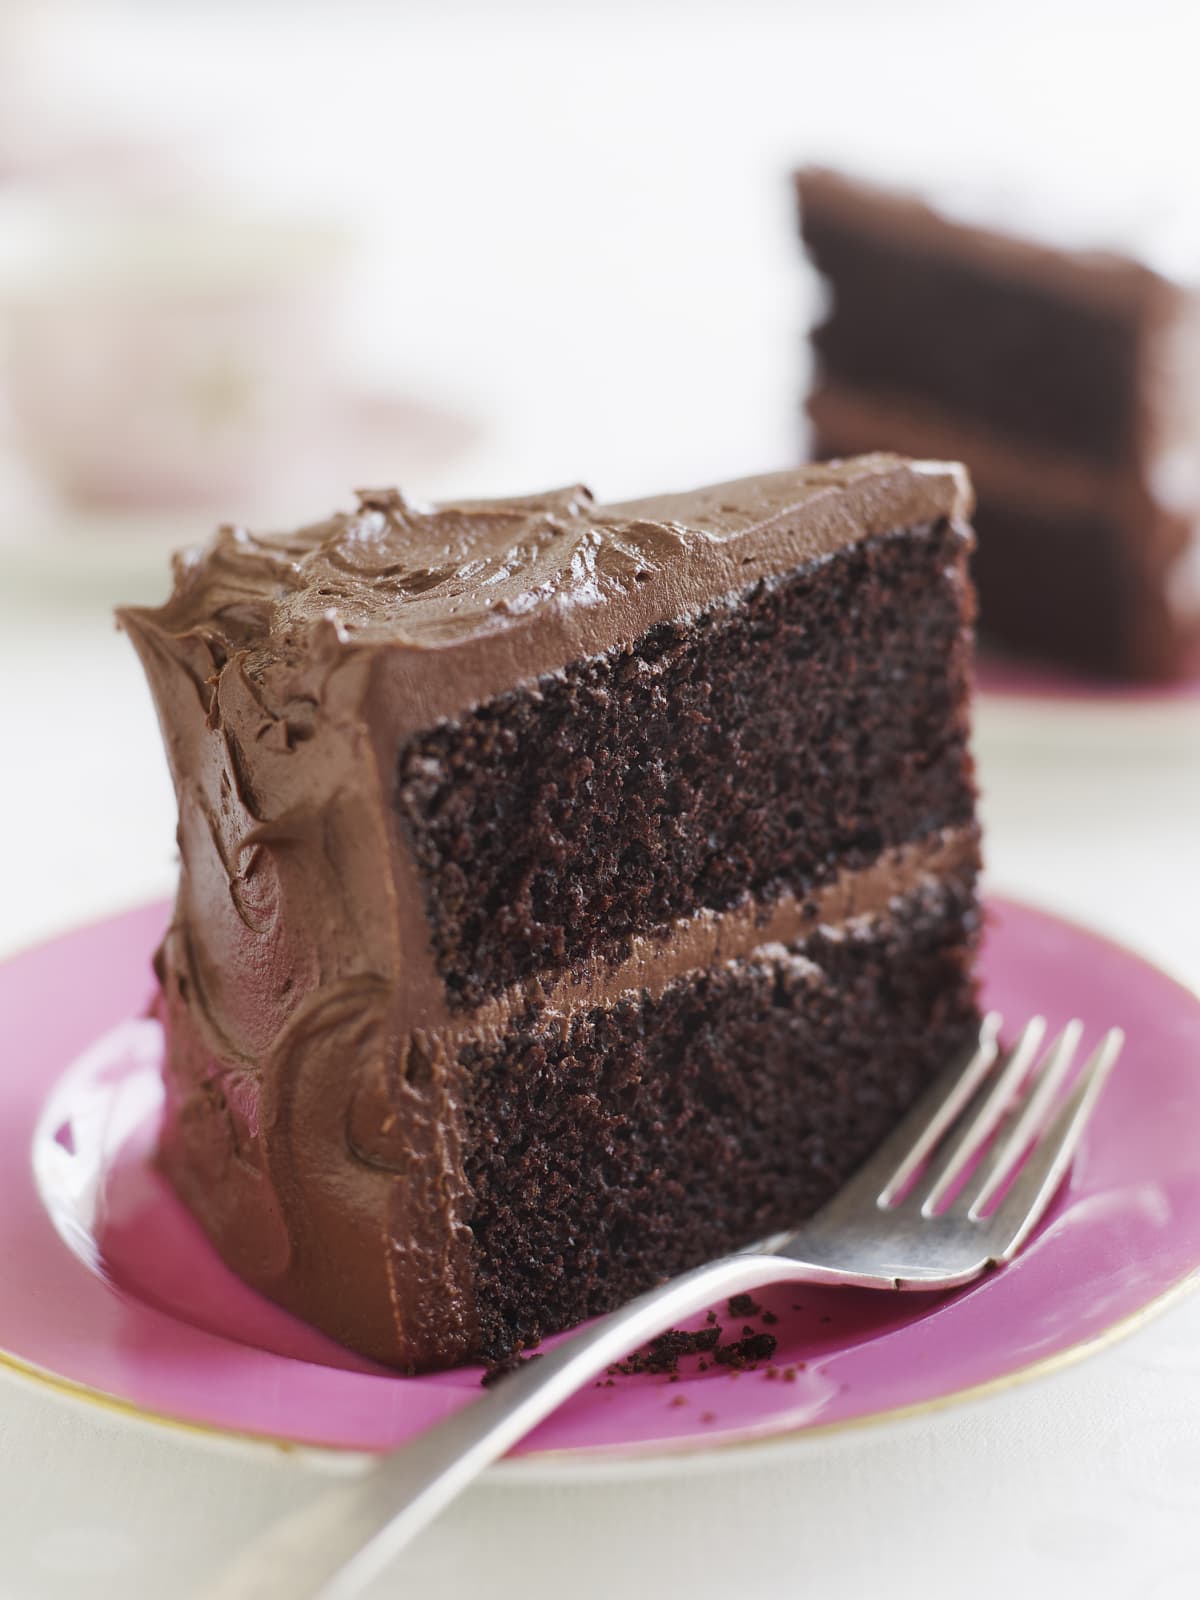 Slice of frosted chocolate cake